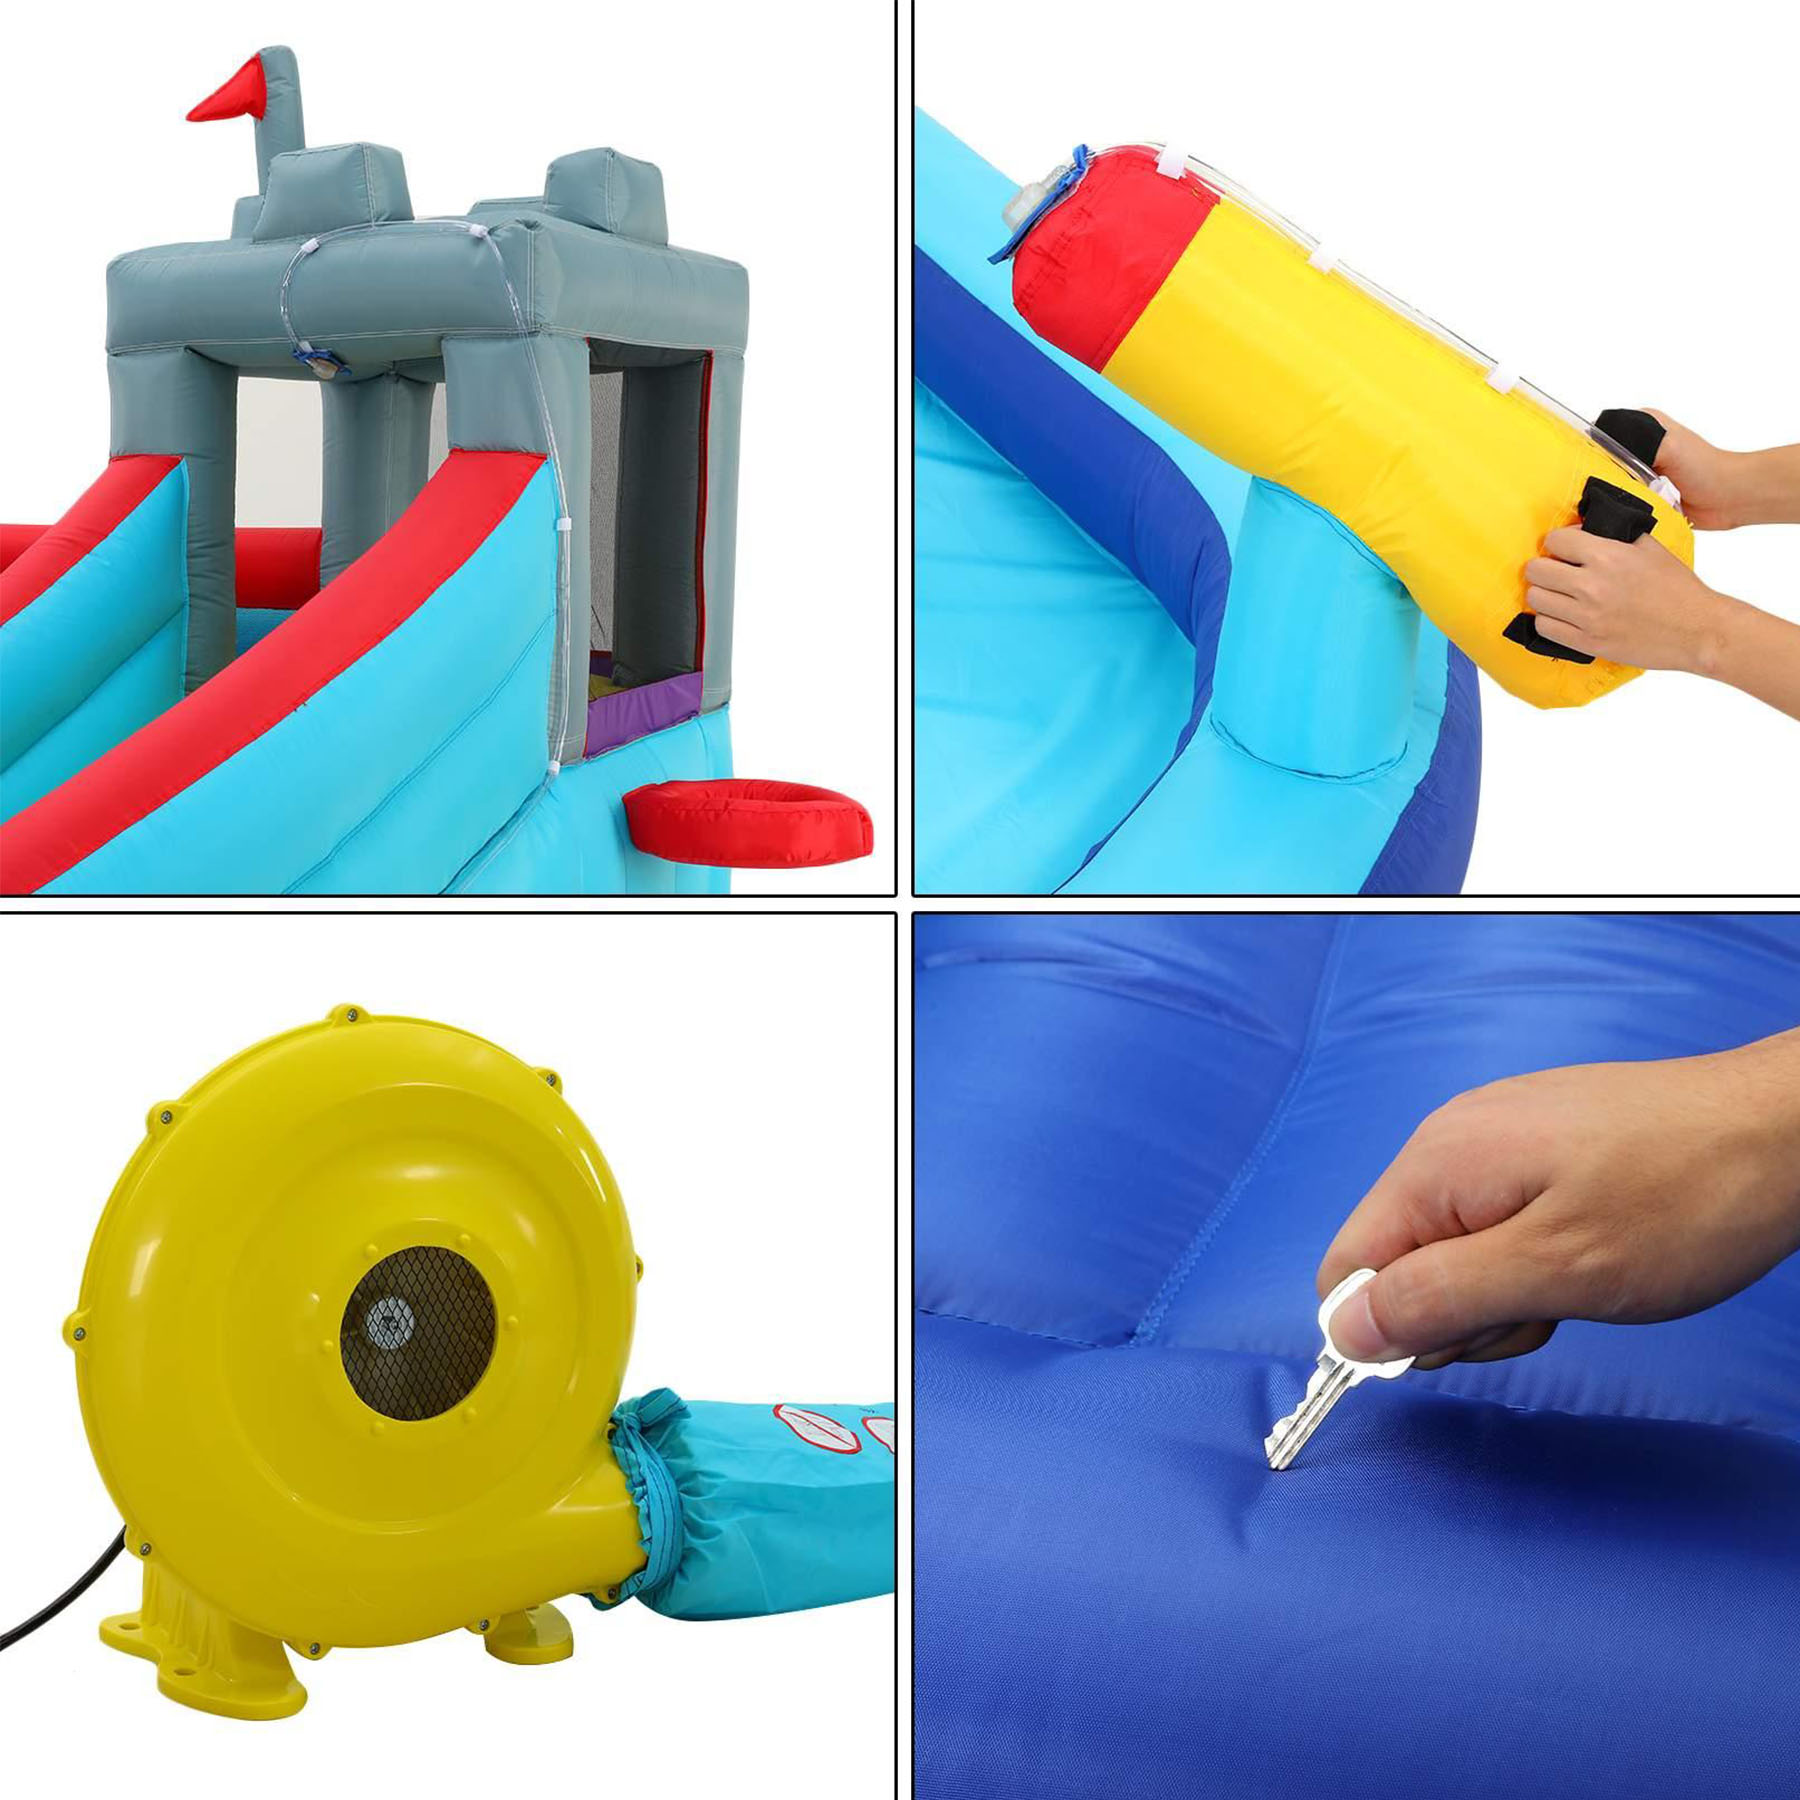 Qhomic Inflatable Bounce House for Toddlers with Blower, Children's Castle with Bouncing Slides, Climbing Wall, Bouncing Area, Basketball Hoop, Water Gun, Inflatable Water Slide with Football Area - image 5 of 12